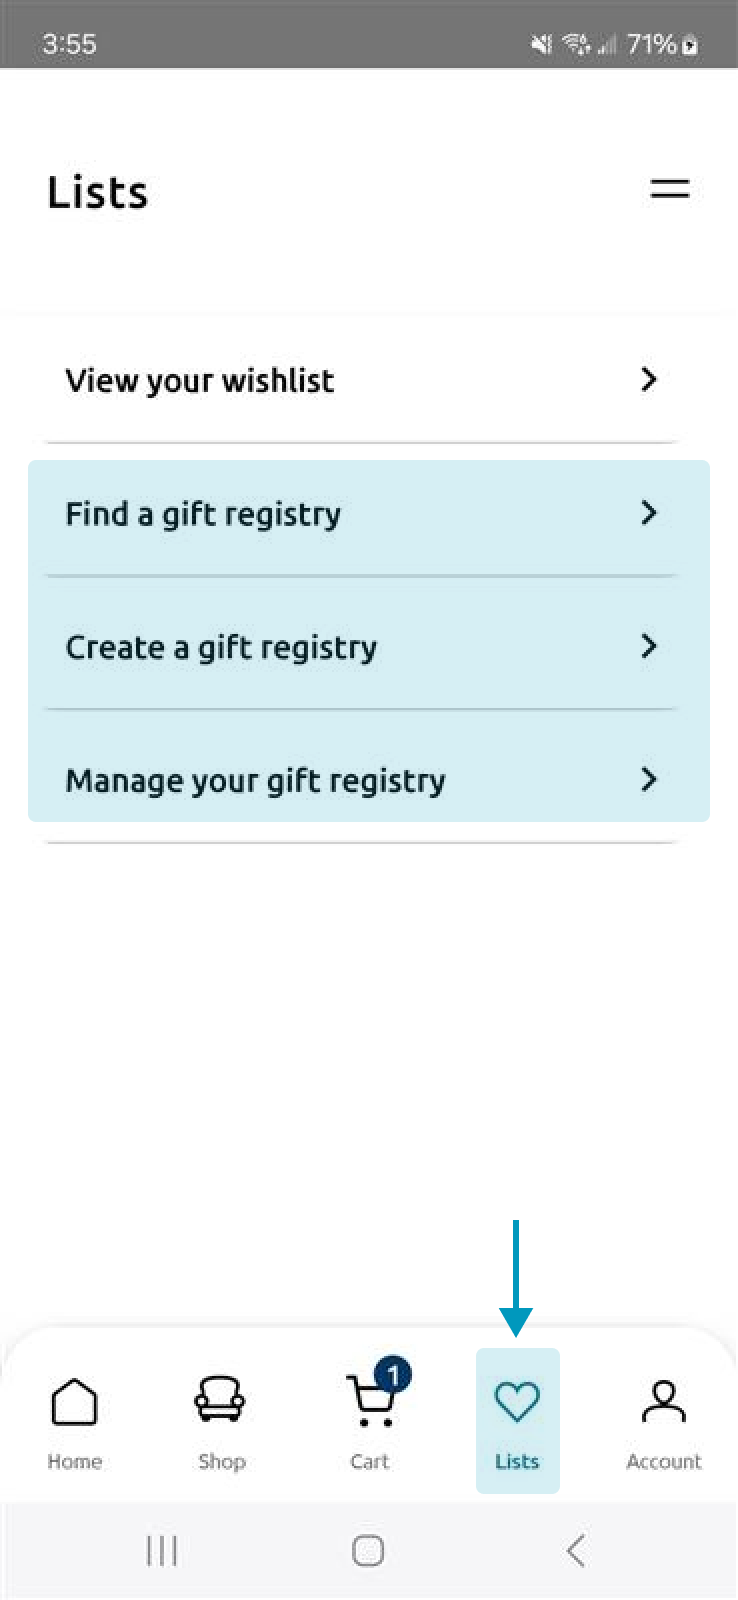 AtHome_Gift_Registry_app_lists.png